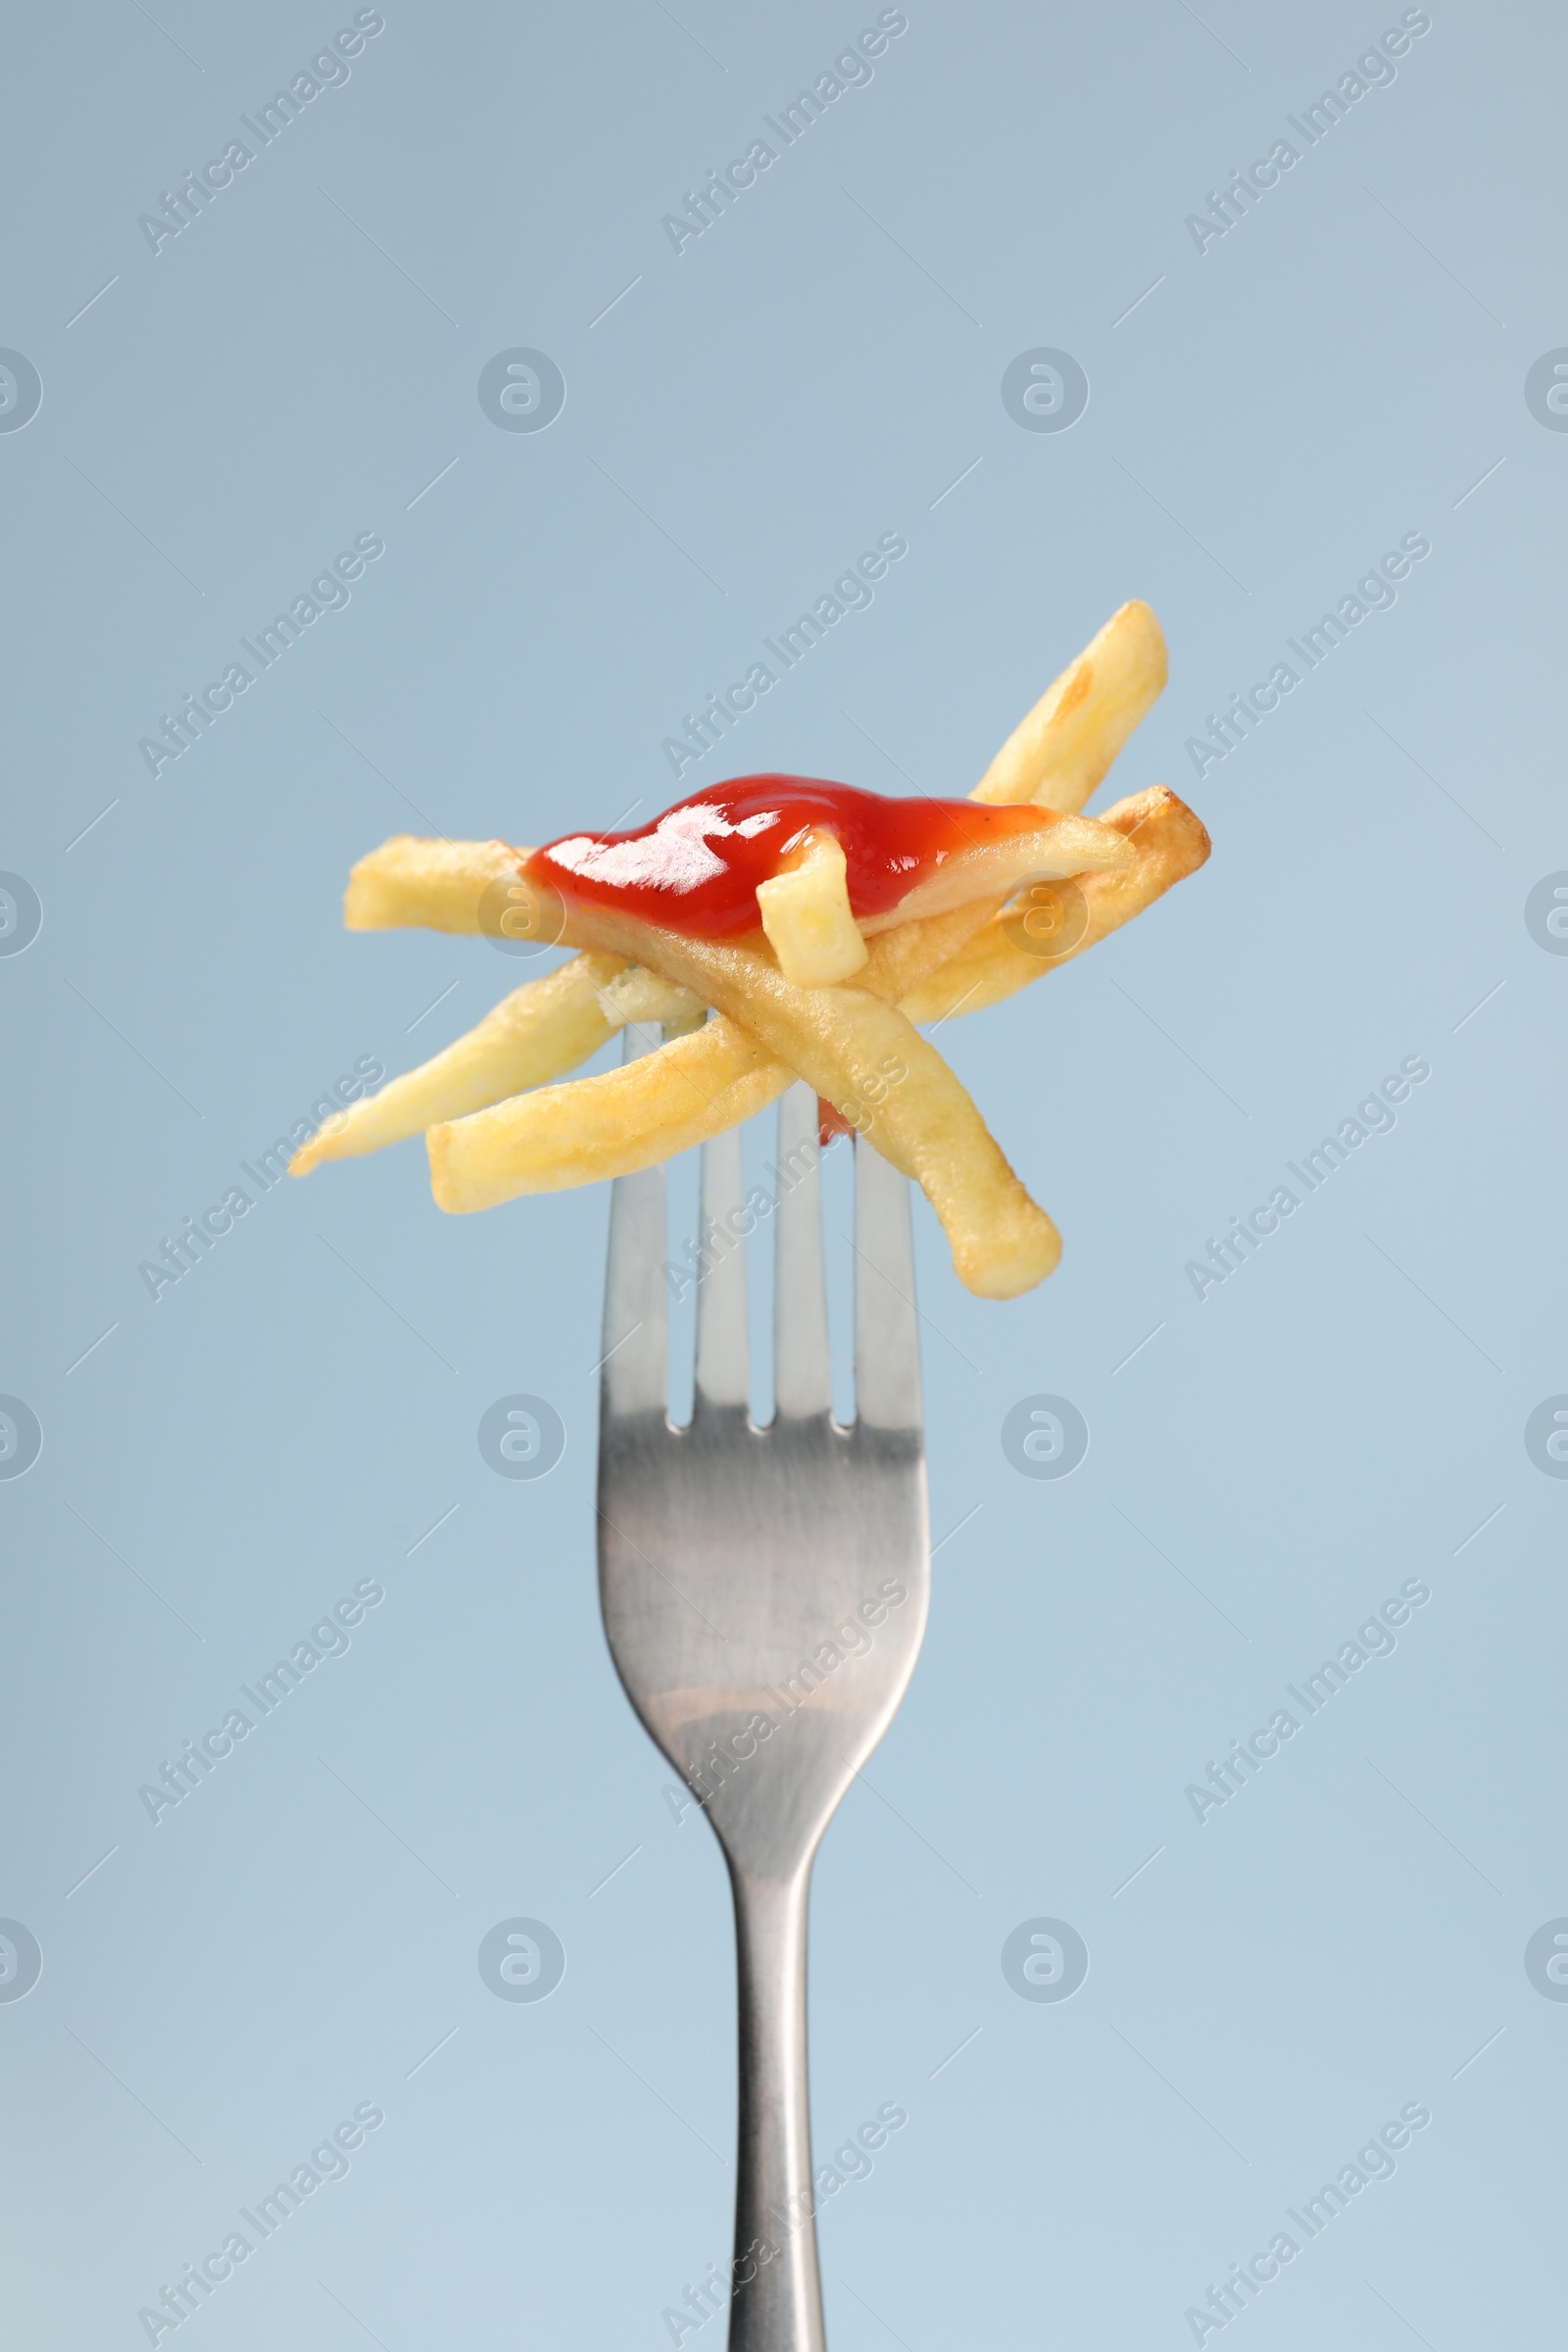 Photo of Fork with tasty french fries against light blue background, closeup